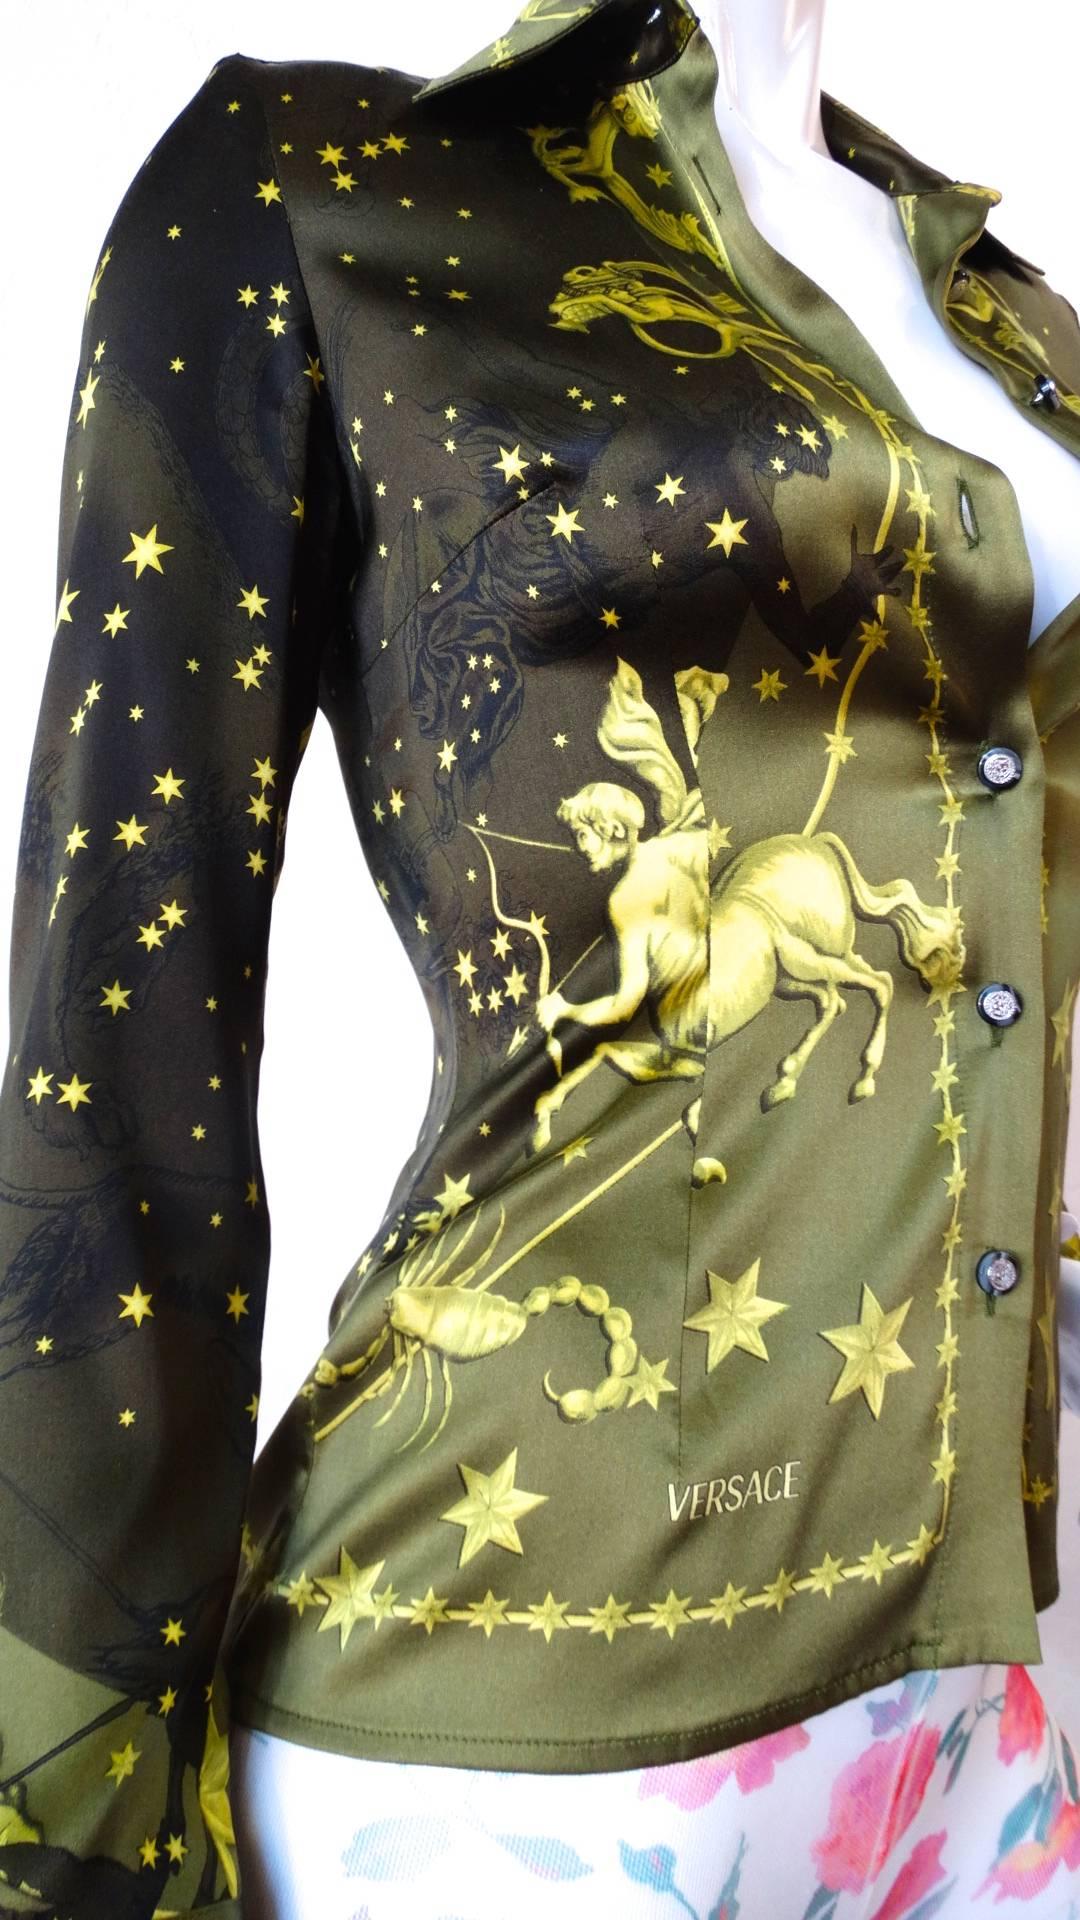 This amazing 1990s Versace constellation themed blouse will have you seeing stars! Incredible olive green ombre silk with golden constellation inspired print- featuring cherubs, stars, and the astrological sign motifs. Buttons up the front with